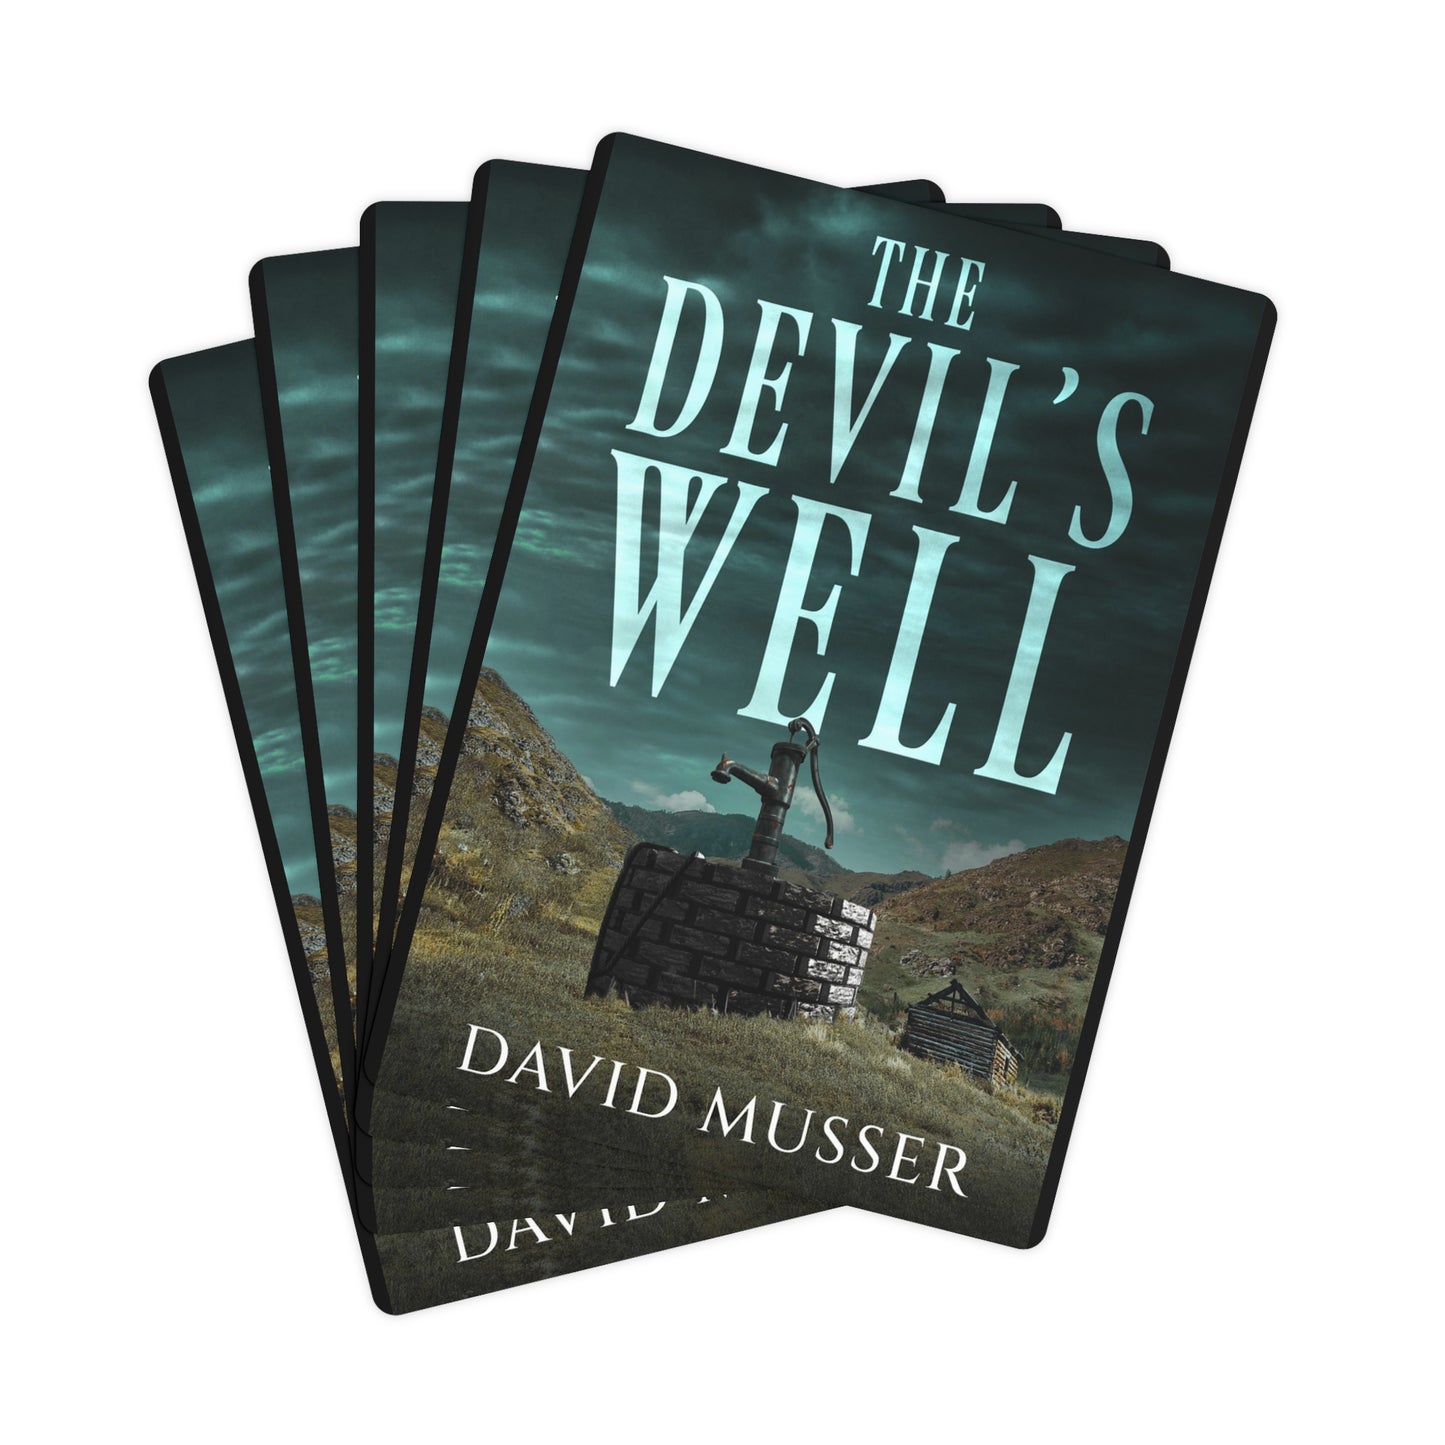 The Devil's Well - Playing Cards